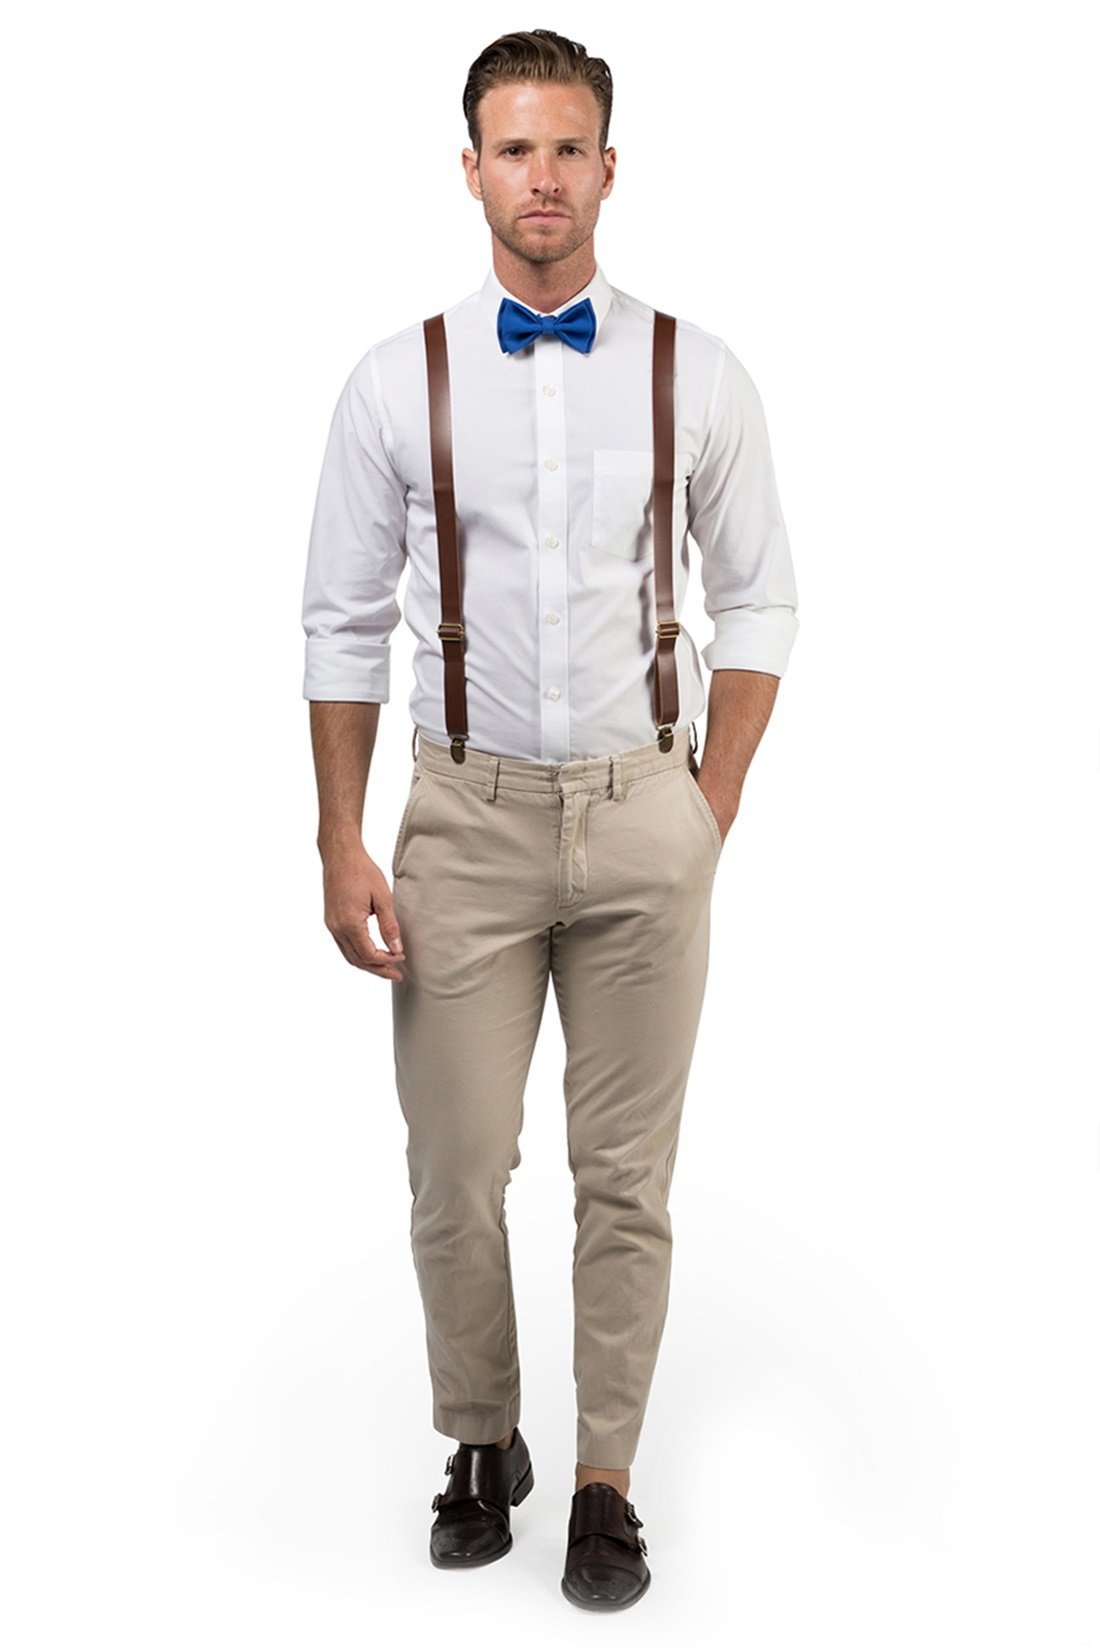 Brown Leather Suspenders & Royal Blue Bow Tie - Baby to Adult Sizes–  Armoniia